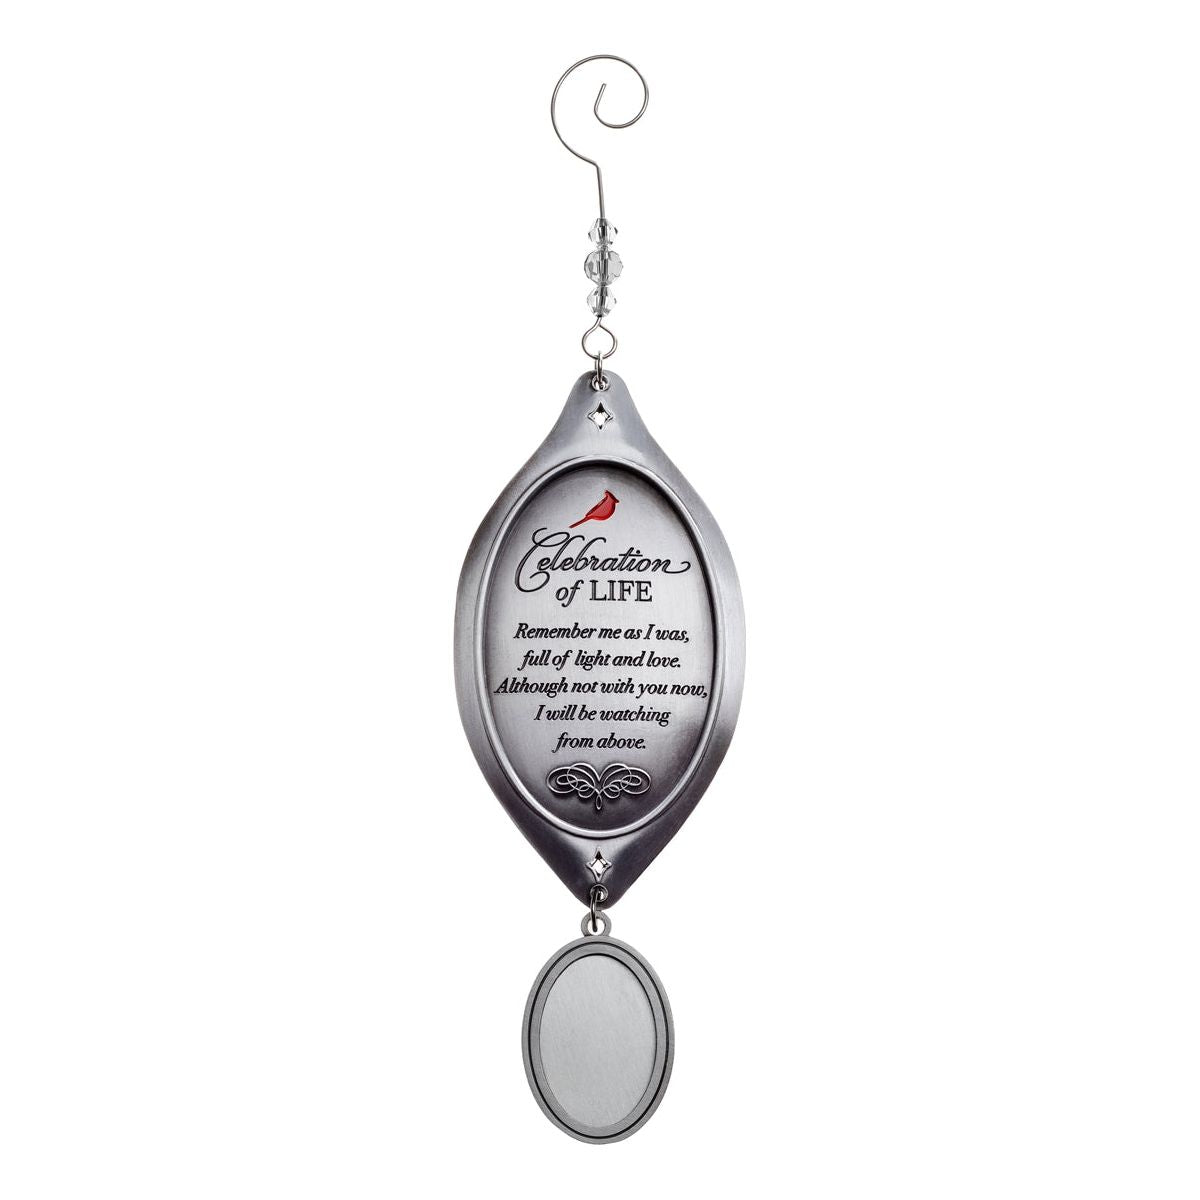 Celebration of Life Memorial Ornament- Cast metal top engraved with "Celebration of Life" sentiment and attached photo pendant.